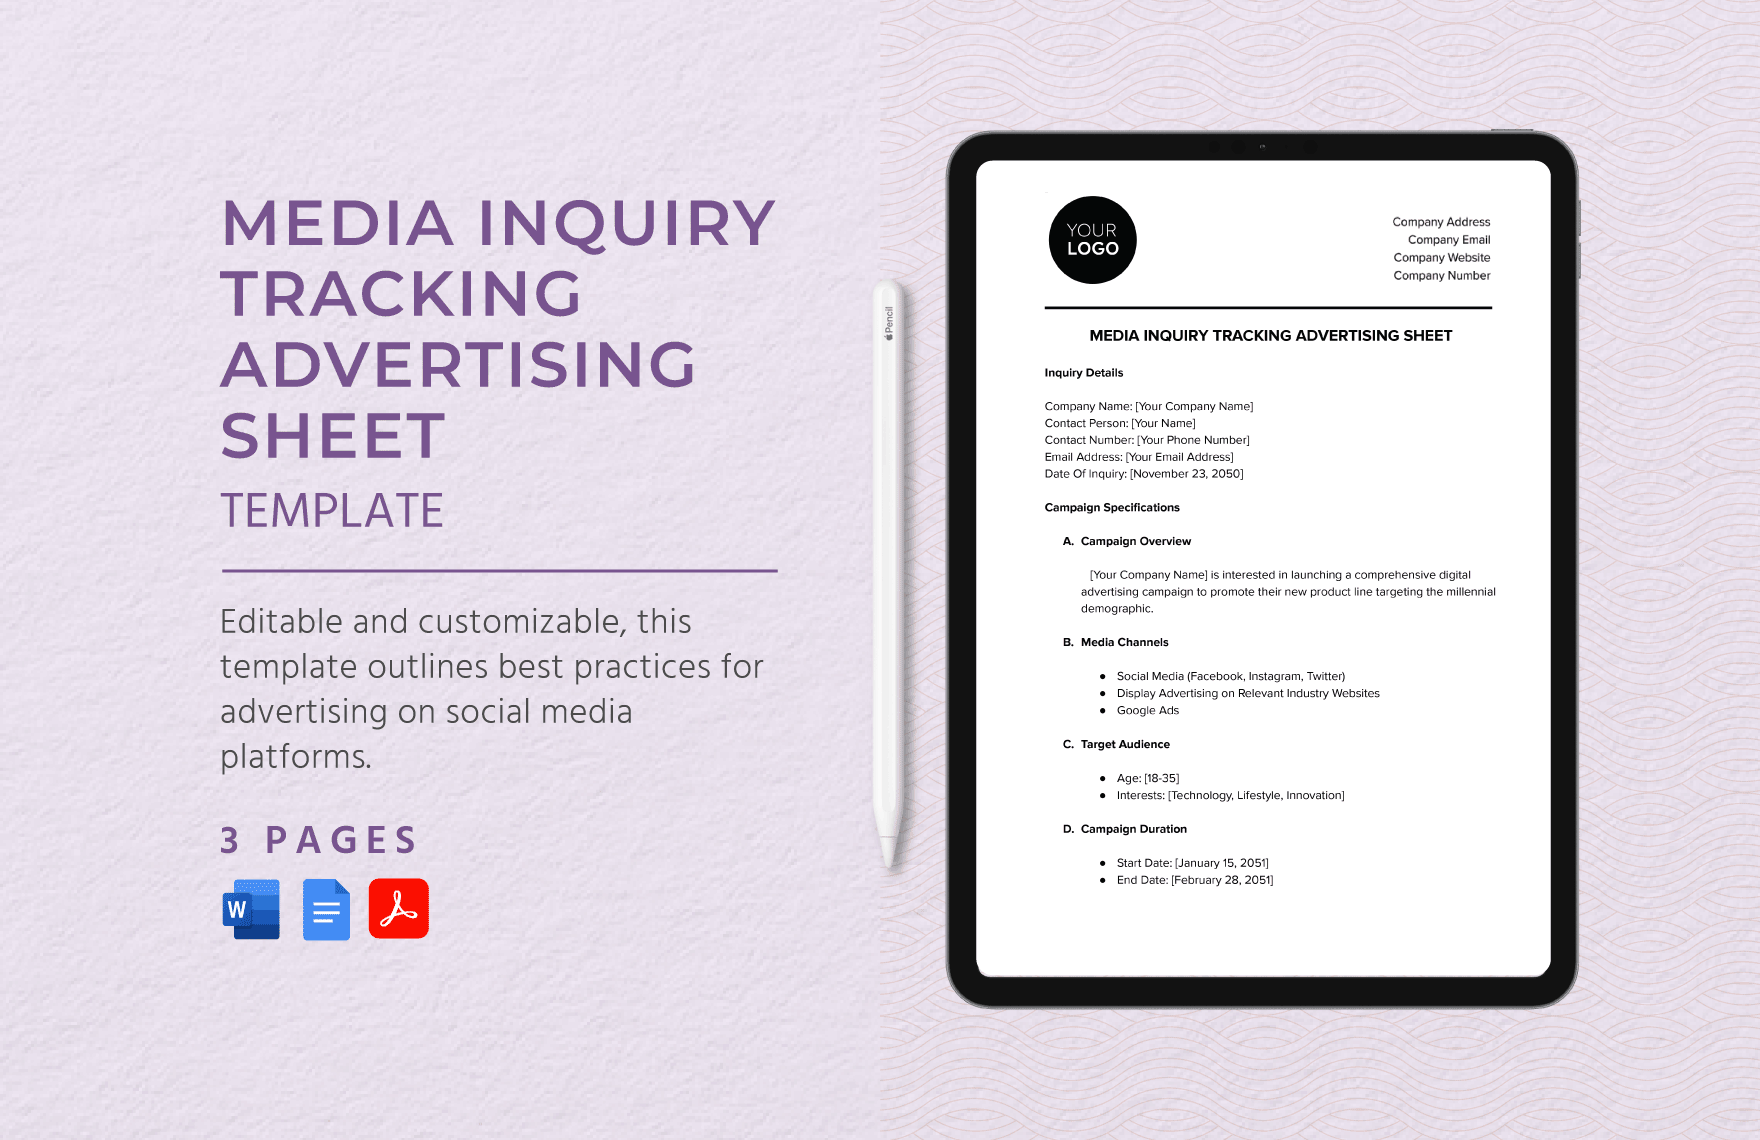 Media Inquiry Tracking Advertising Sheet Template